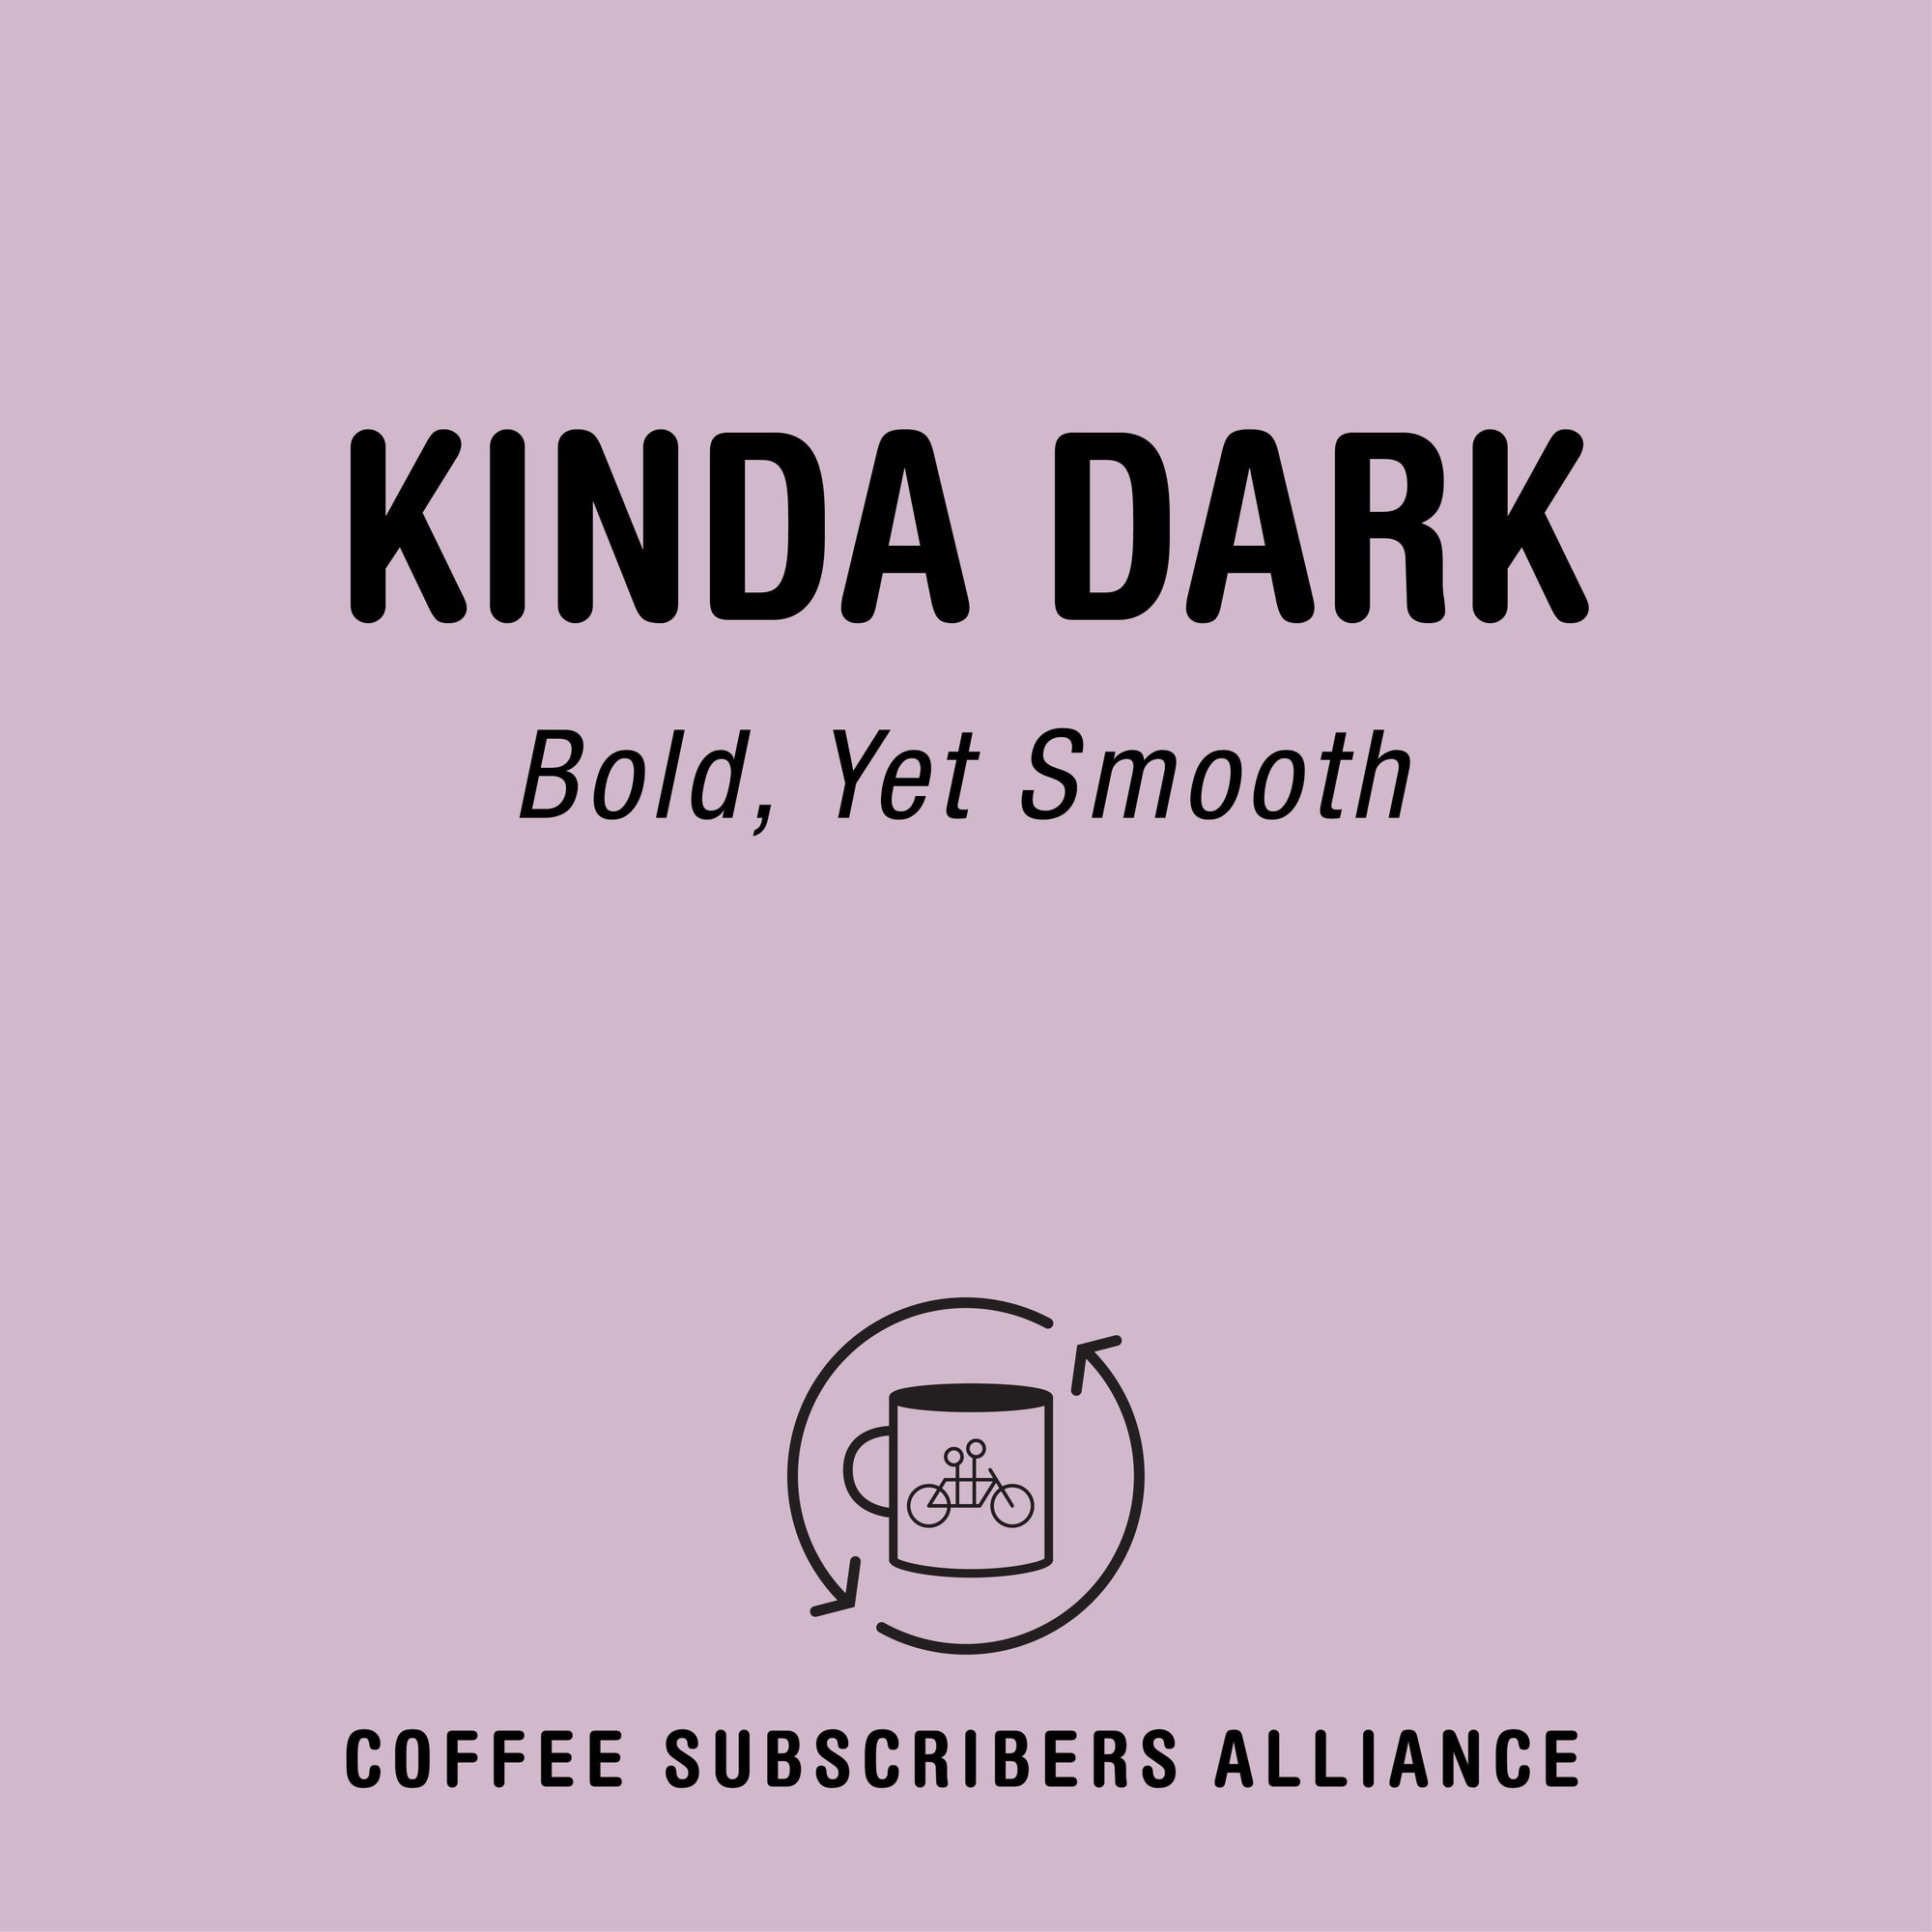 A graphic featuring text that reads "kinda dark bold, yet smooth" above a coffee cup icon labeled "Tandem coffee subscription alliance," set against a plain lilac background.